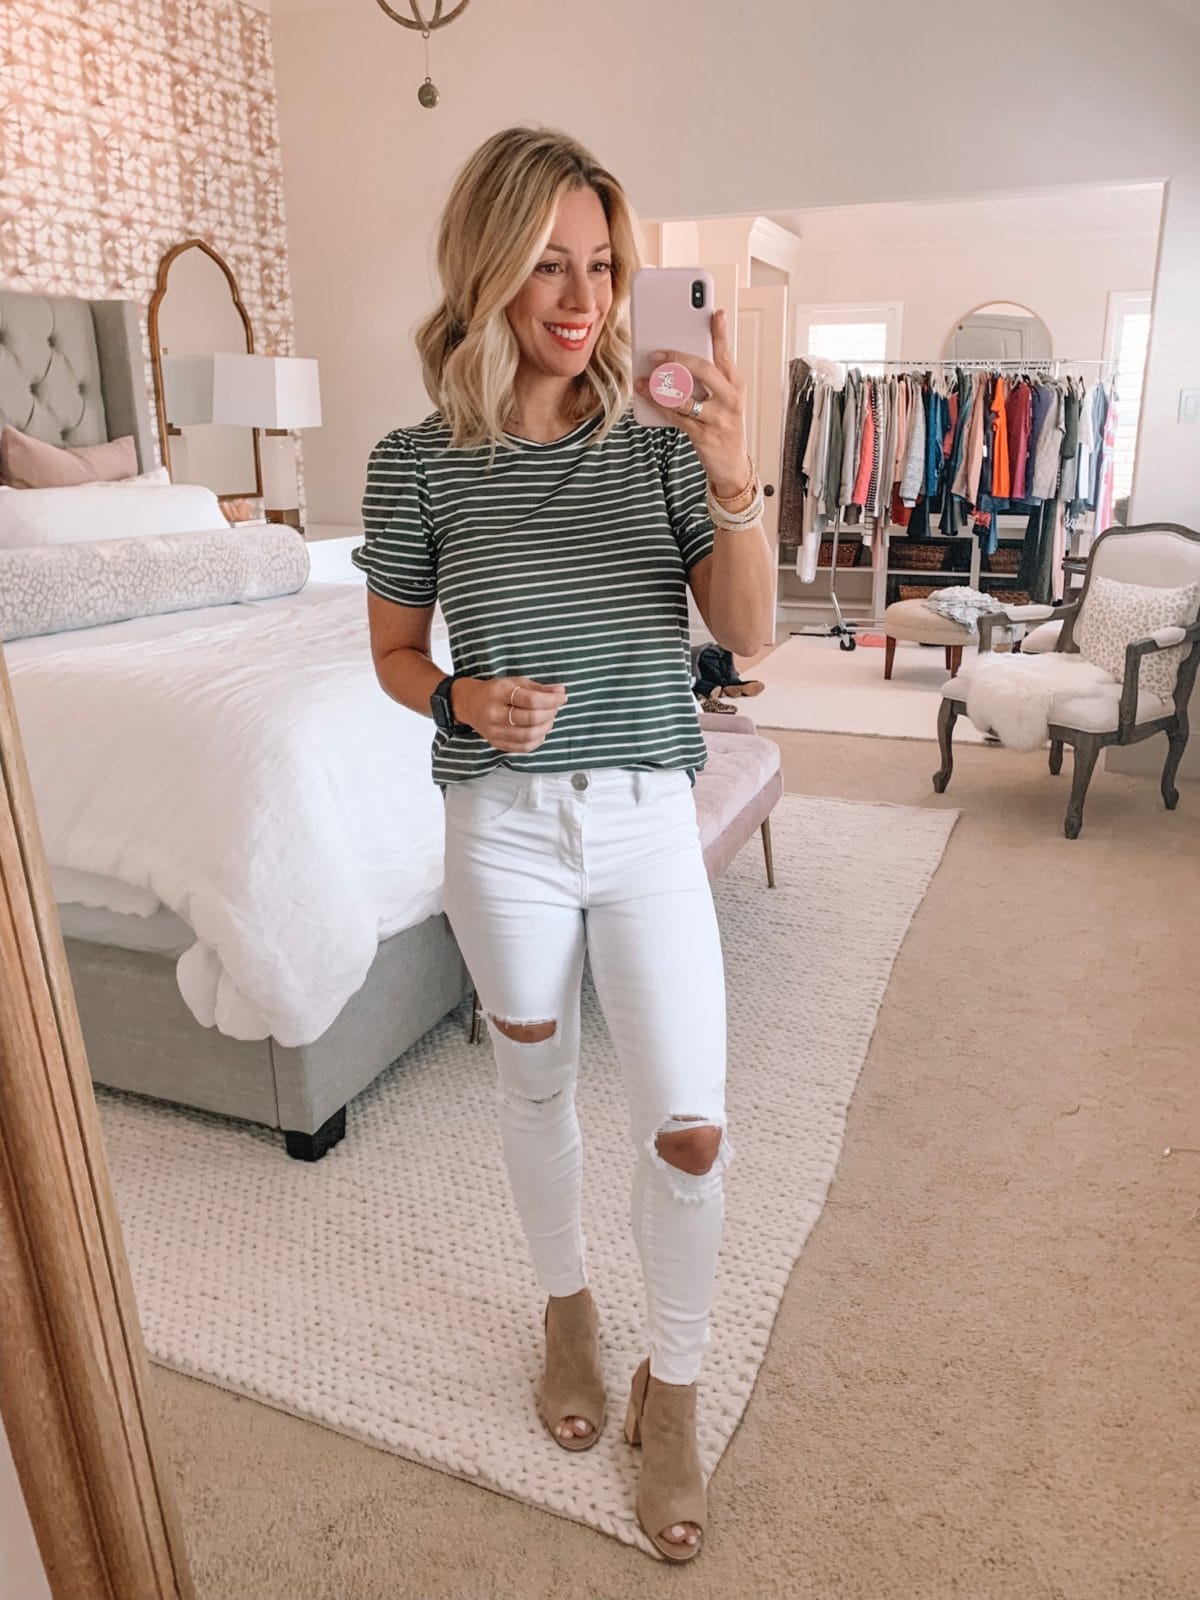 Dressing Room - Green stripe shirt with white jeans